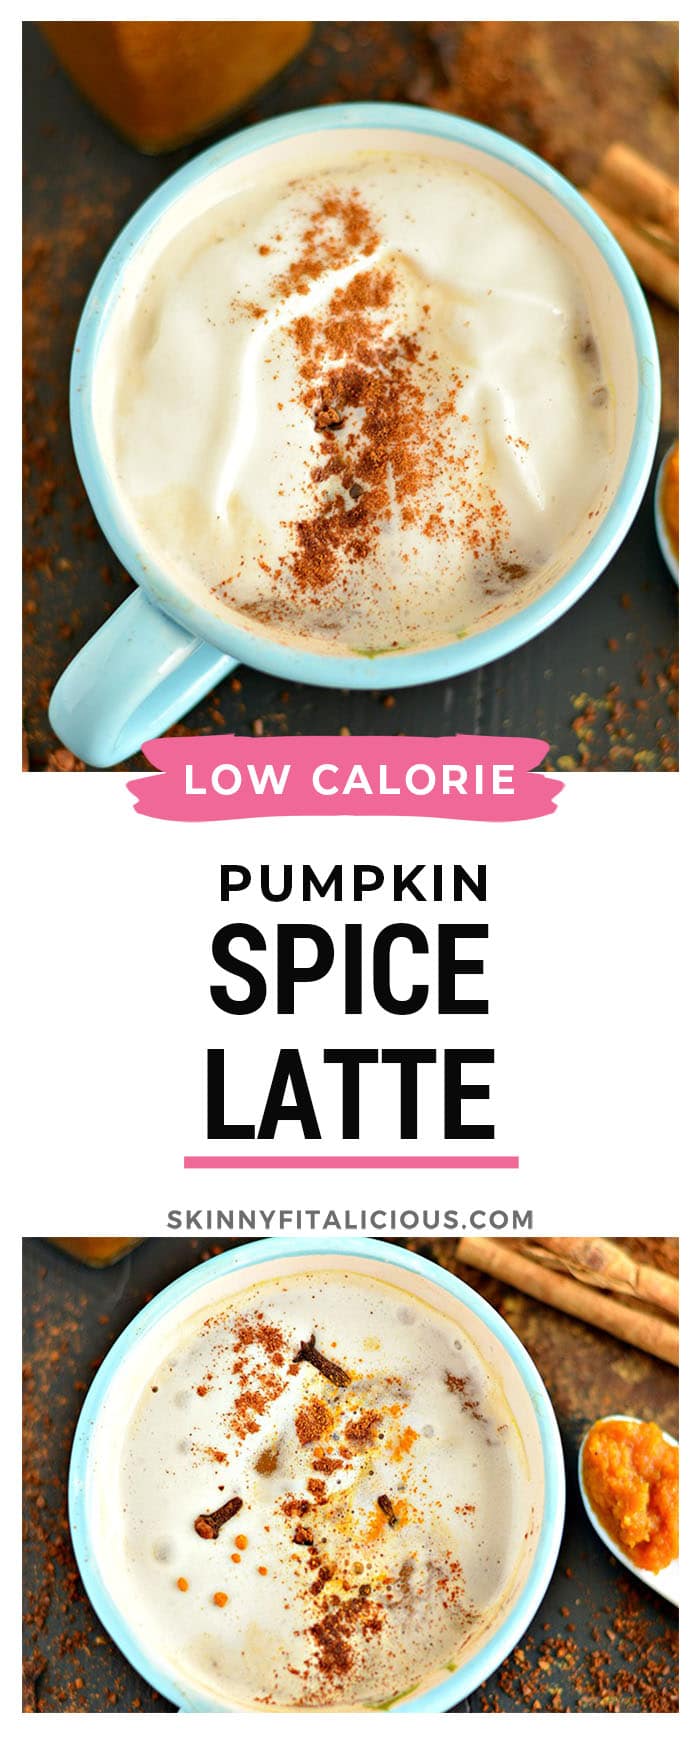 Low Sugar Turmeric Pumpkin Spice Coffee Syrup made with real pumpkin and comforting antioxidant rich spices. A syrup that adds flavor, not calories to your morning coffee! Store in the fridge for an easy addition to your morning routine. Gluten free + Low Calorie + Vegan + Paleo